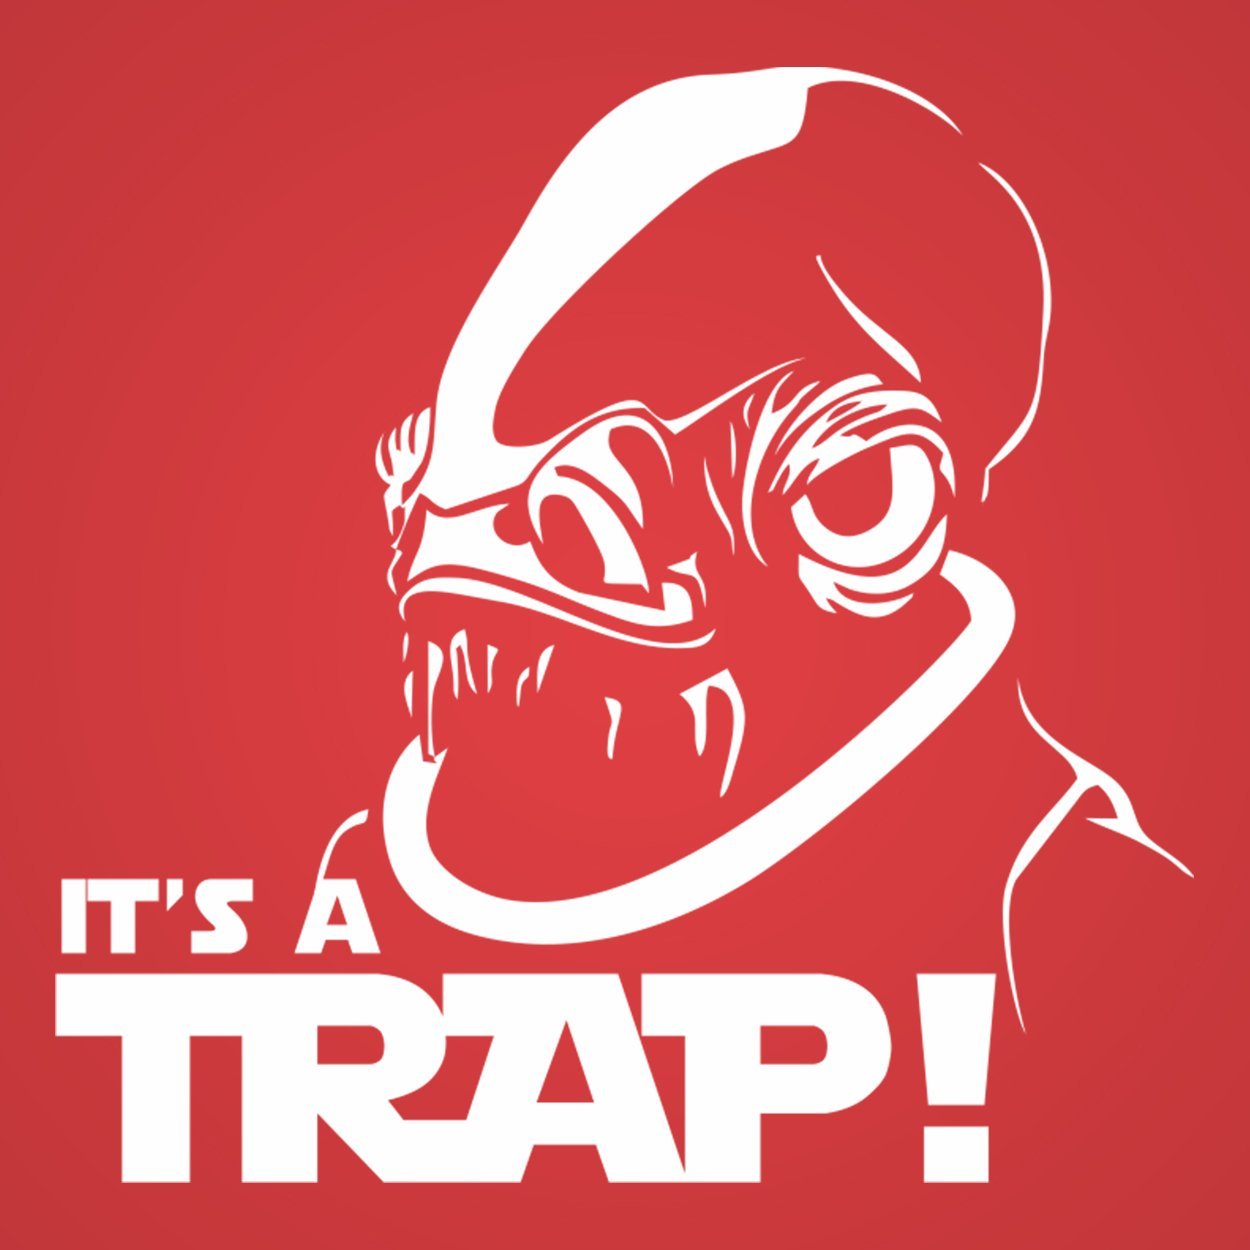 It's A Trap - DonkeyTees